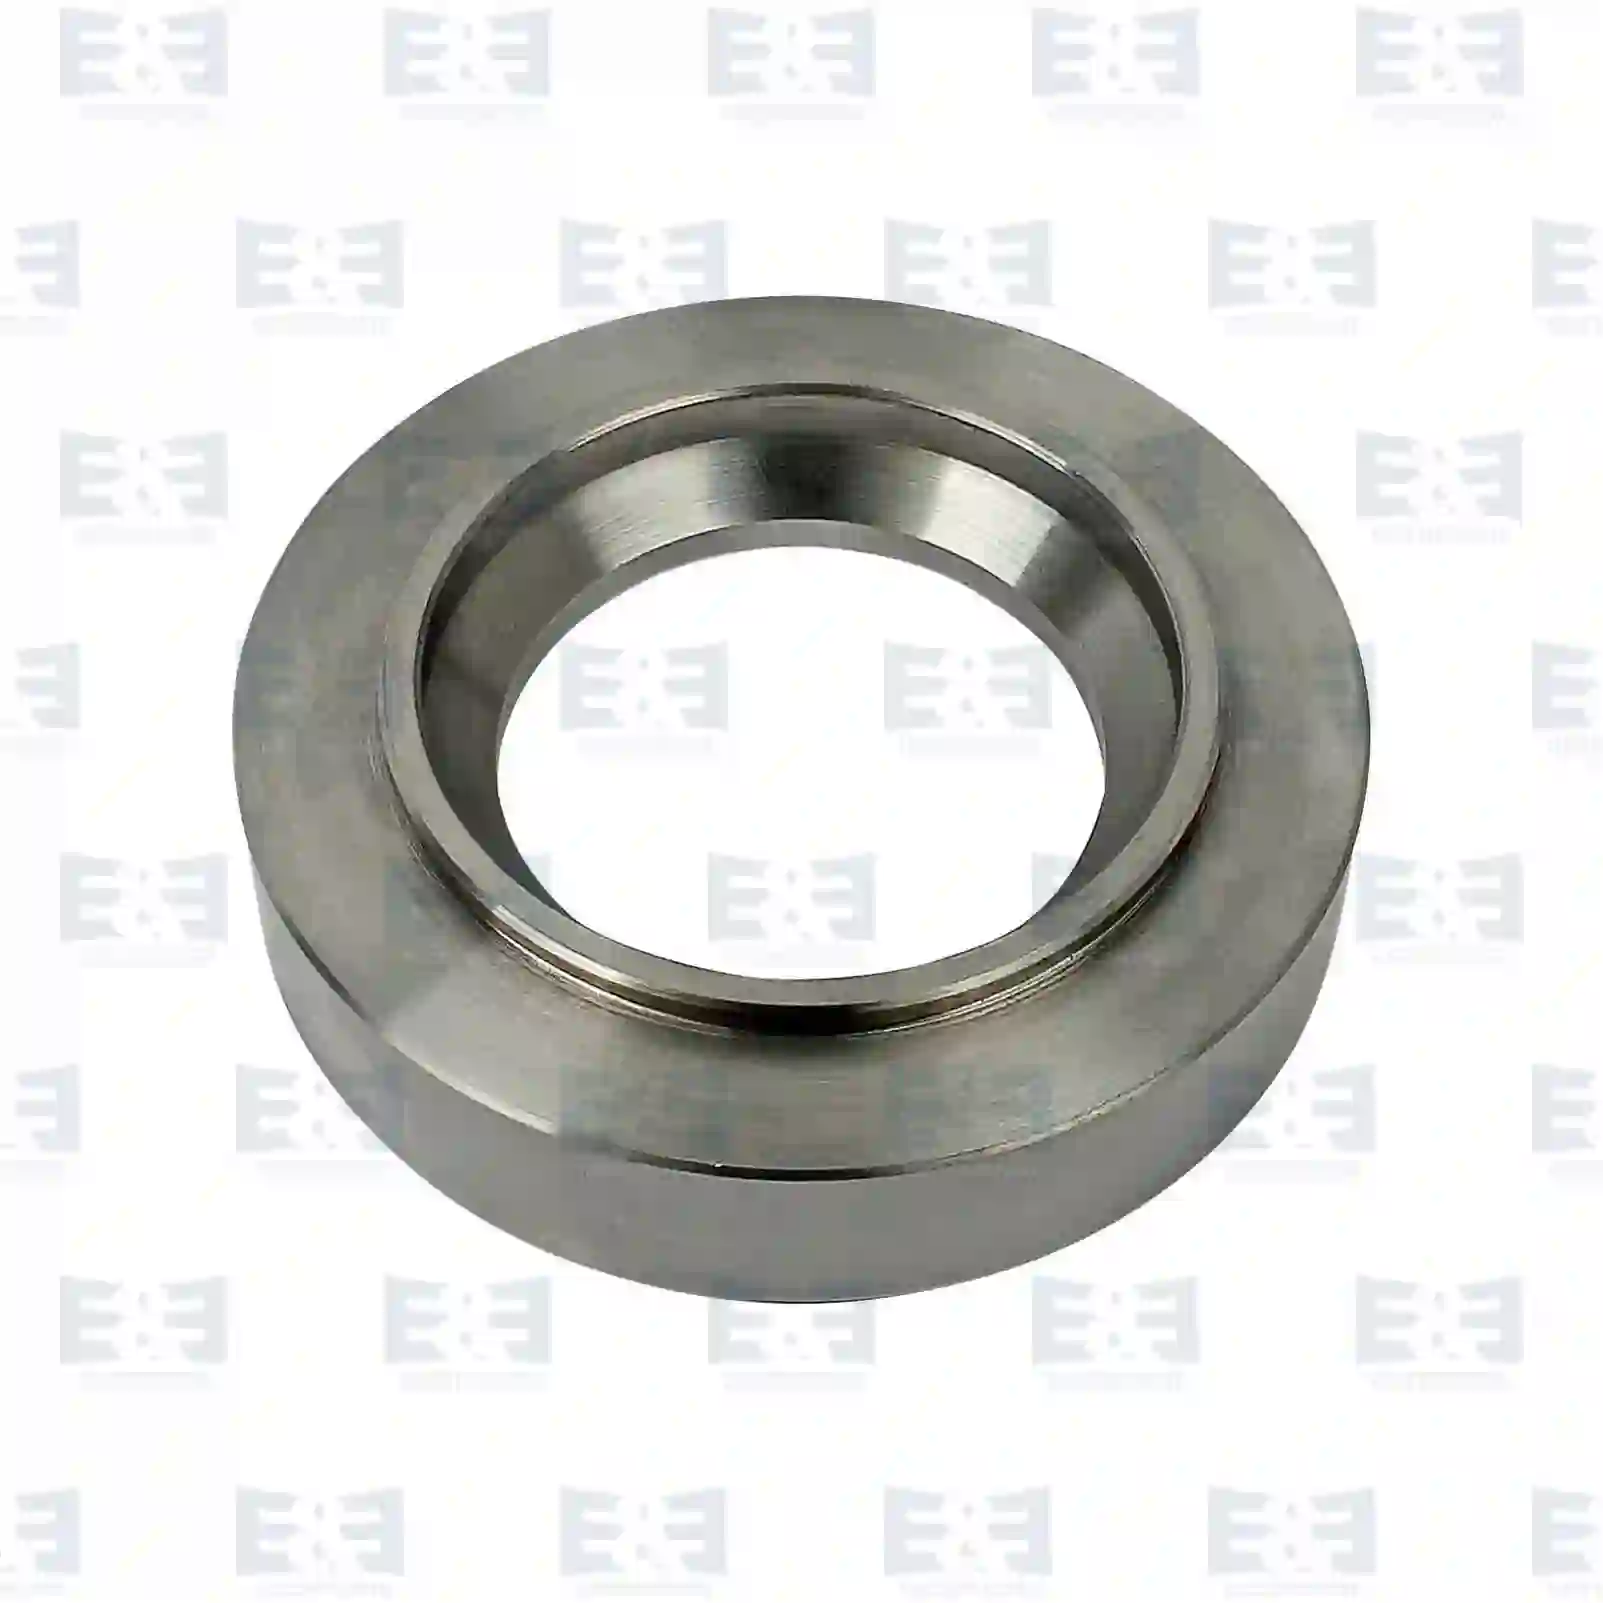  Thrust ring || E&E Truck Spare Parts | Truck Spare Parts, Auotomotive Spare Parts